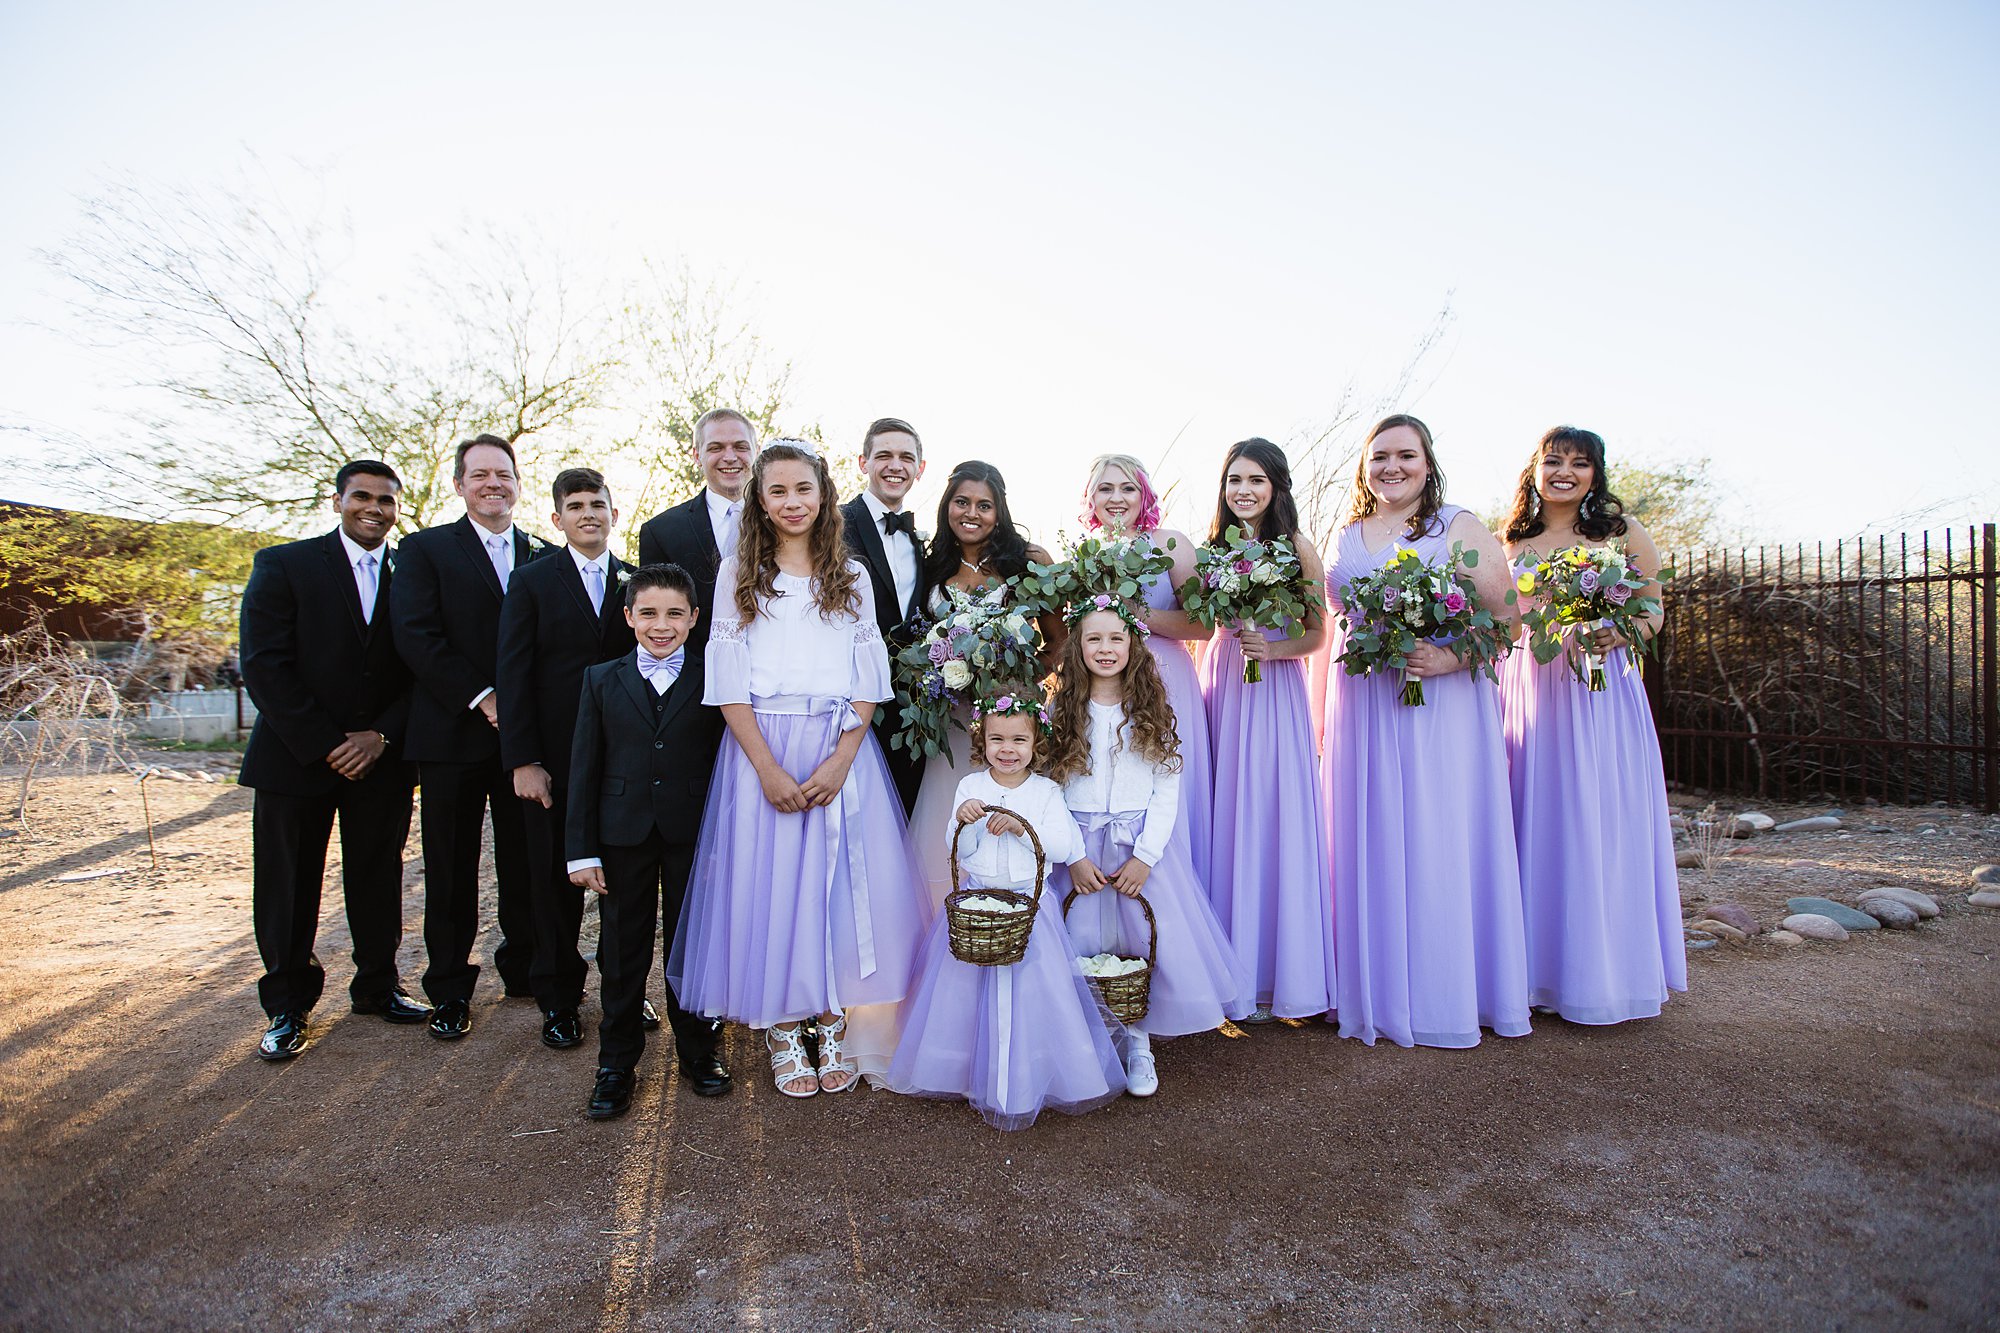 Lavender bridal party with bride and groom, groomsmen, bridesmaids, ring bearer, and flower girls by wedding photographer PMA Photography.